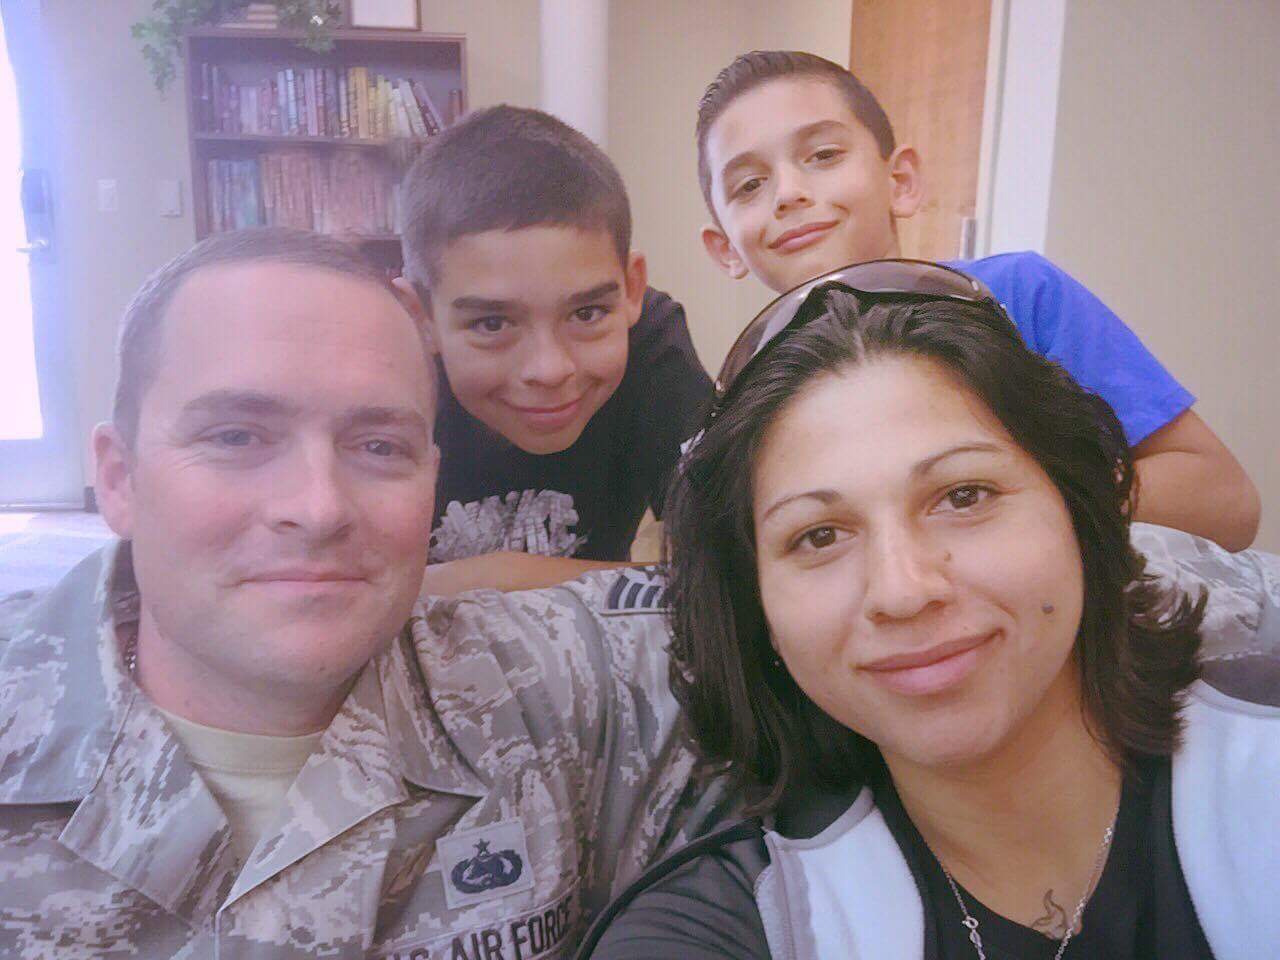 Thank you for your service! KING 5 Mornings surprises military family ...